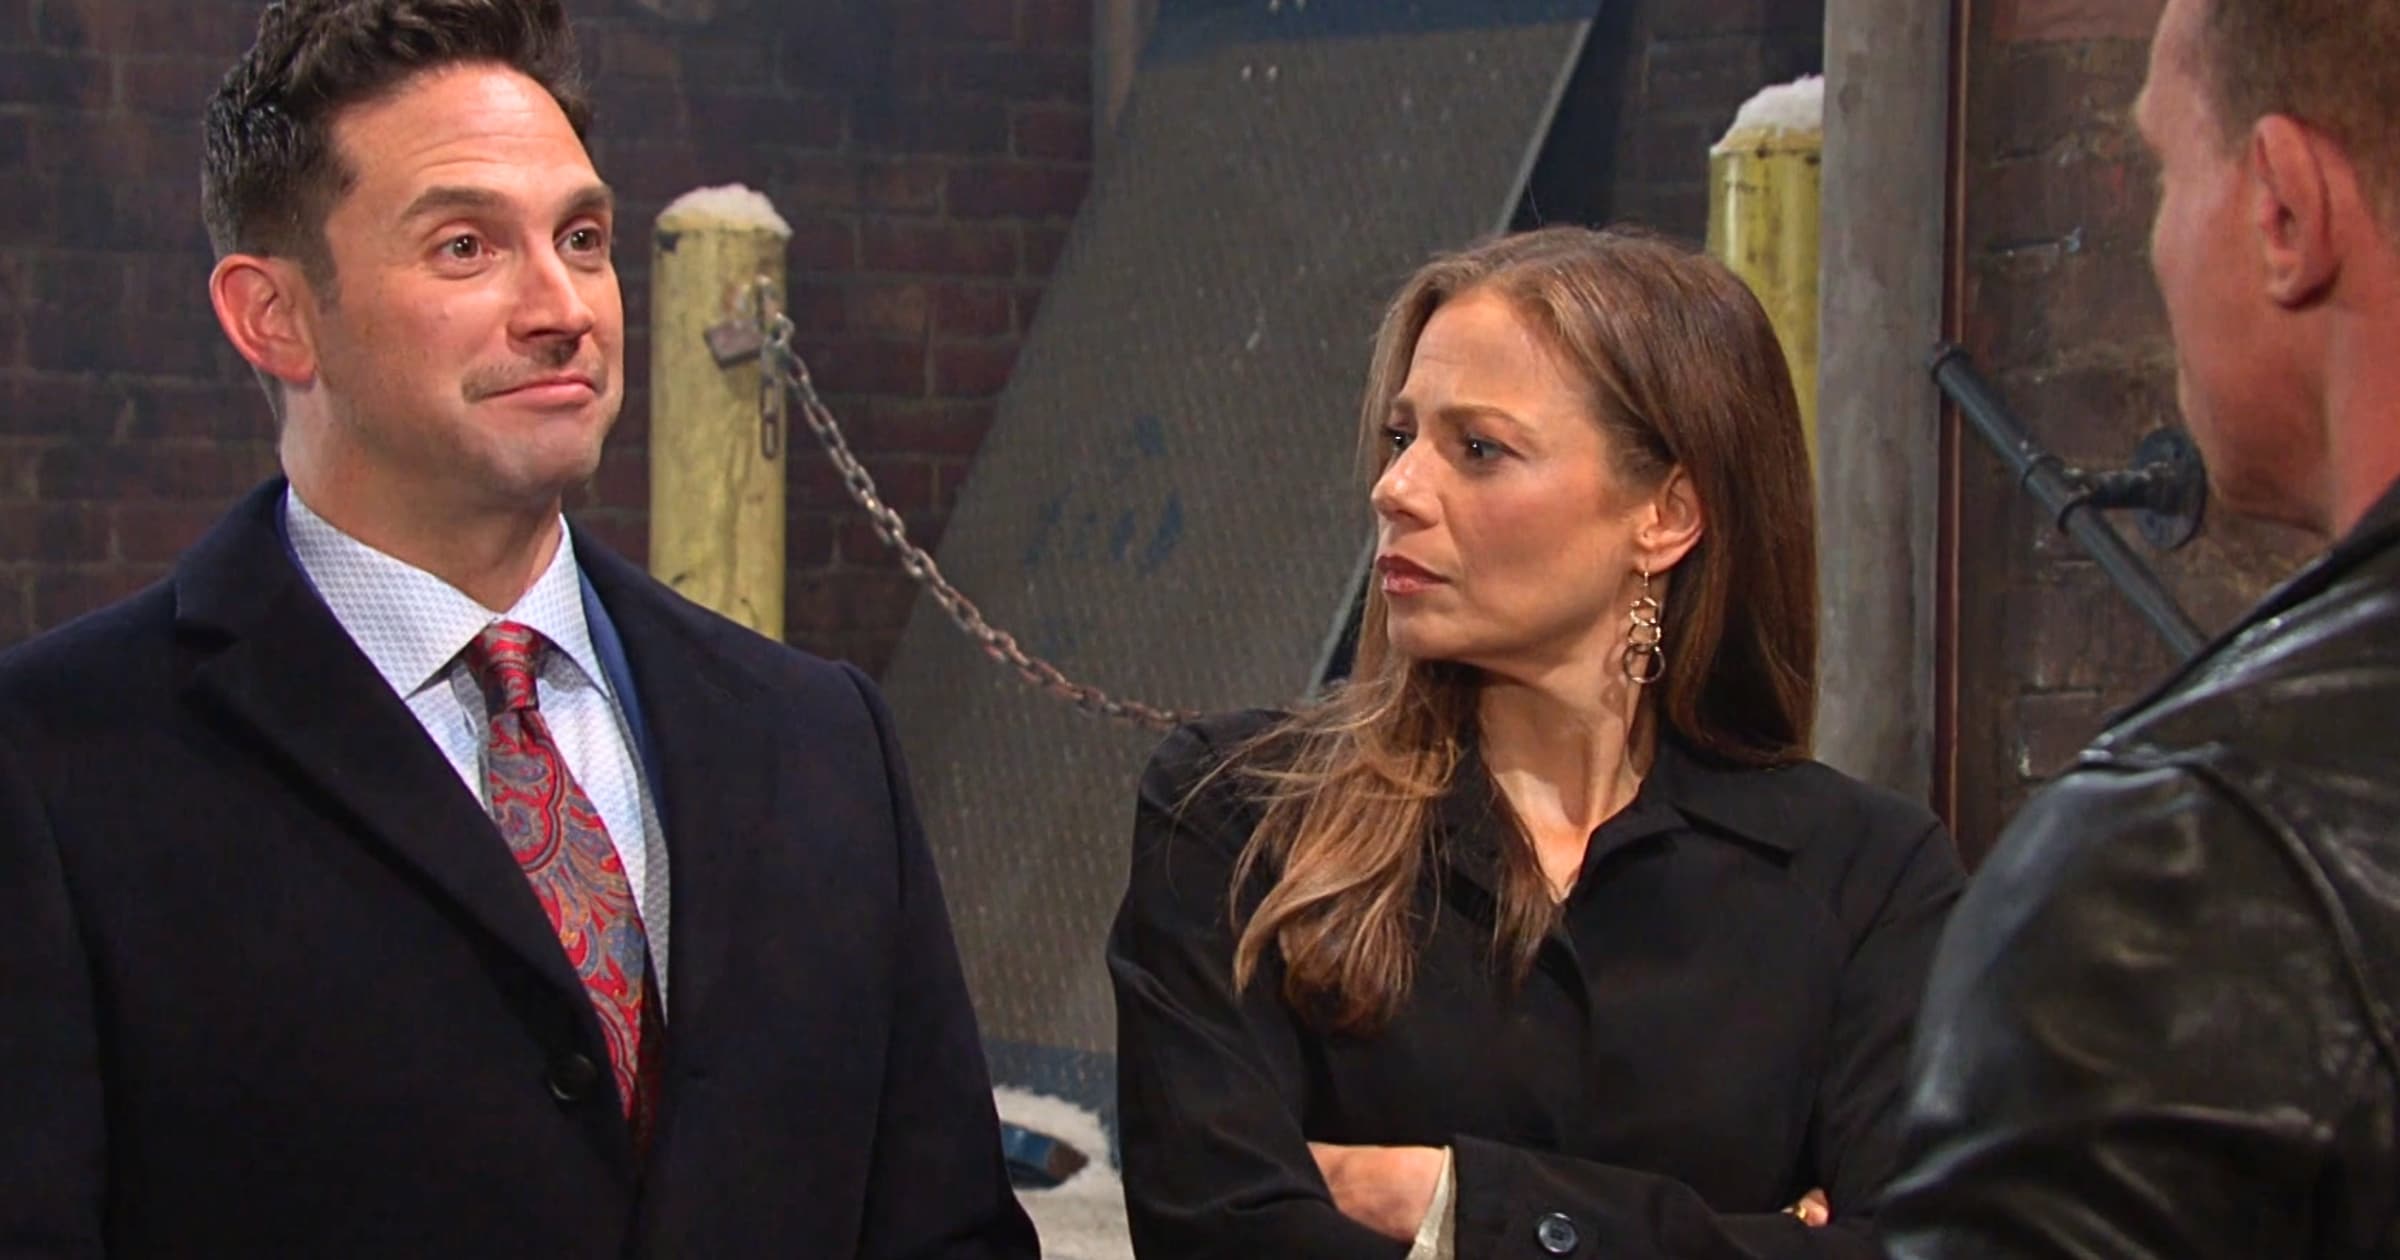 Days of Our Lives - Dec 27 - Stefan Ava and Harris